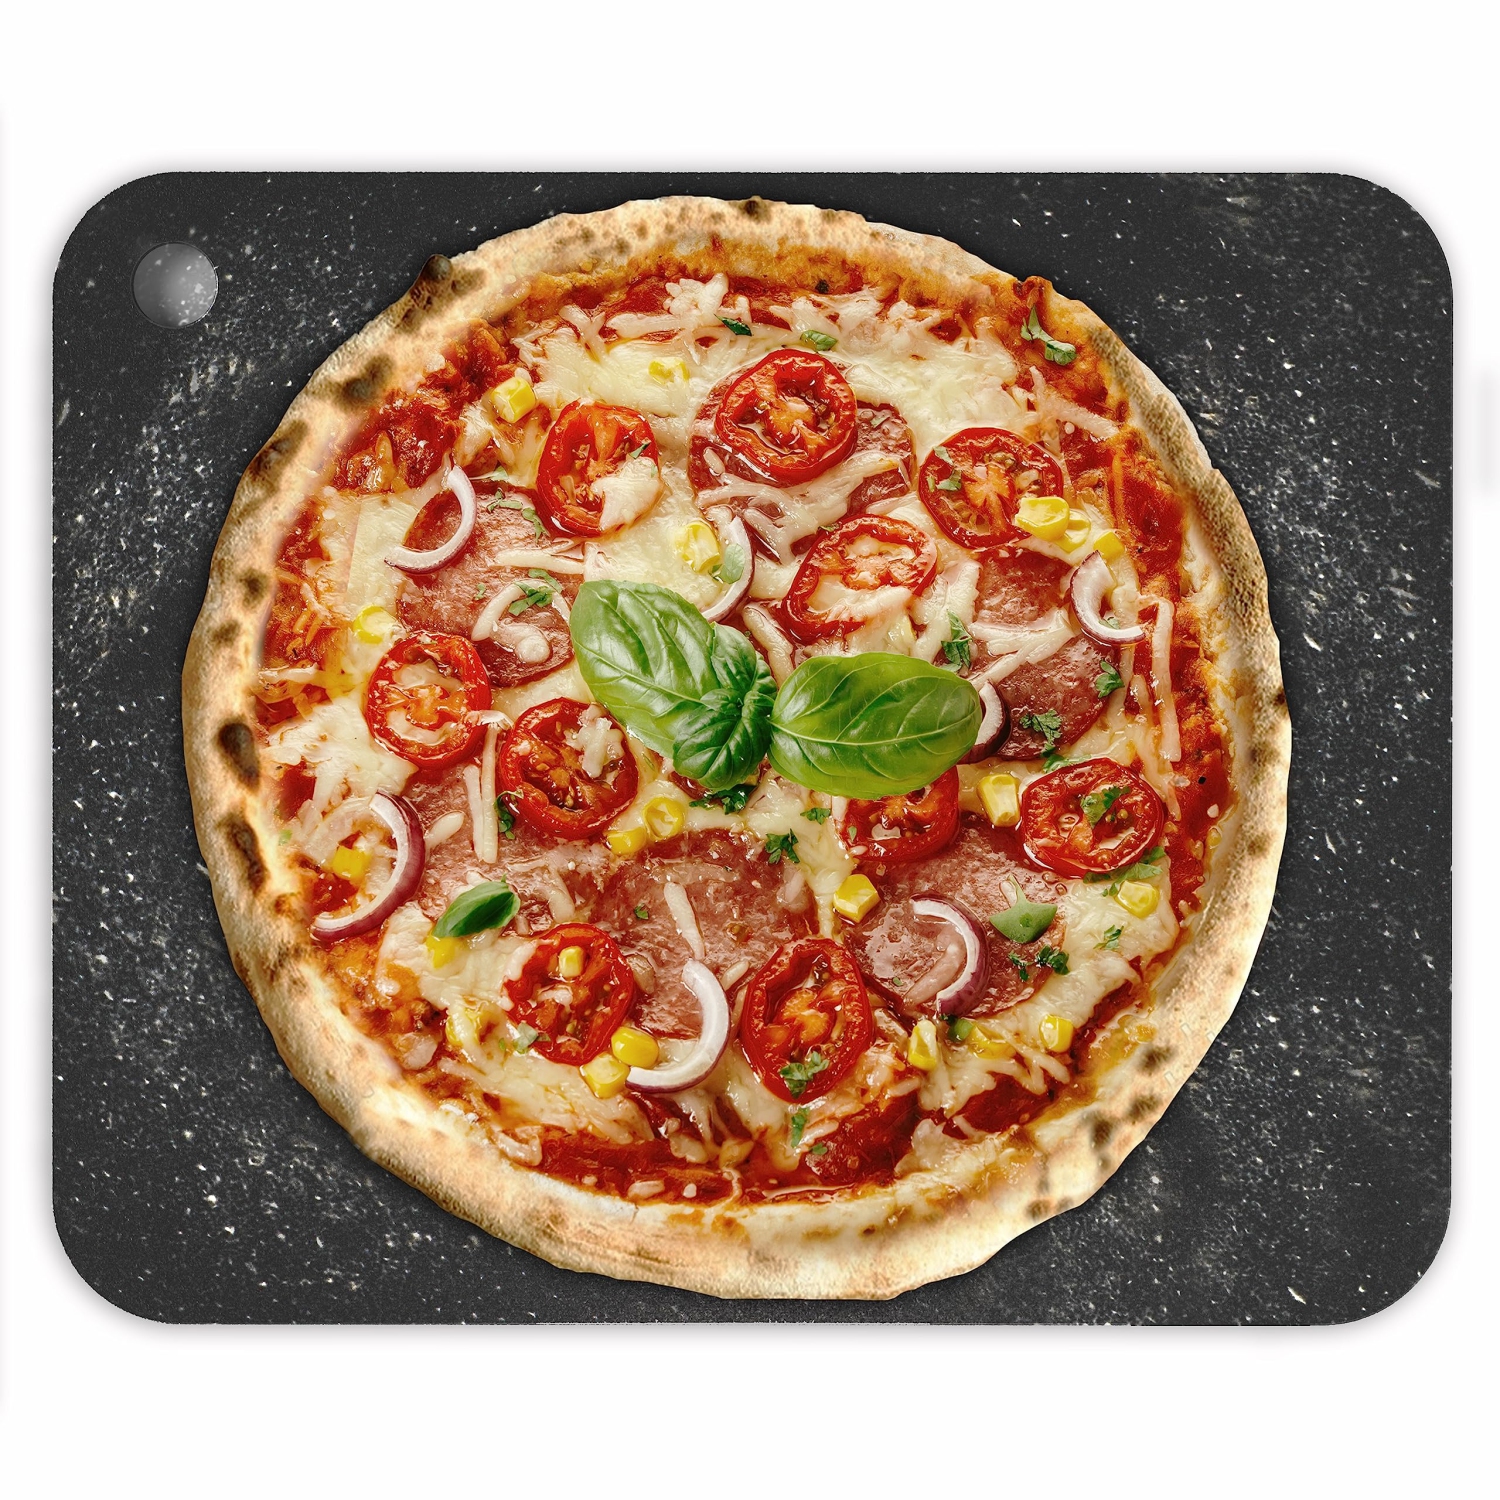 Chef Pomodoro Pizza Steel for Oven, 16 x 13.5 x 0.25 Thick, Baking Steel for Oven, Baking Steel Pizza Stone for Grill and Oven, Original Baking Steel